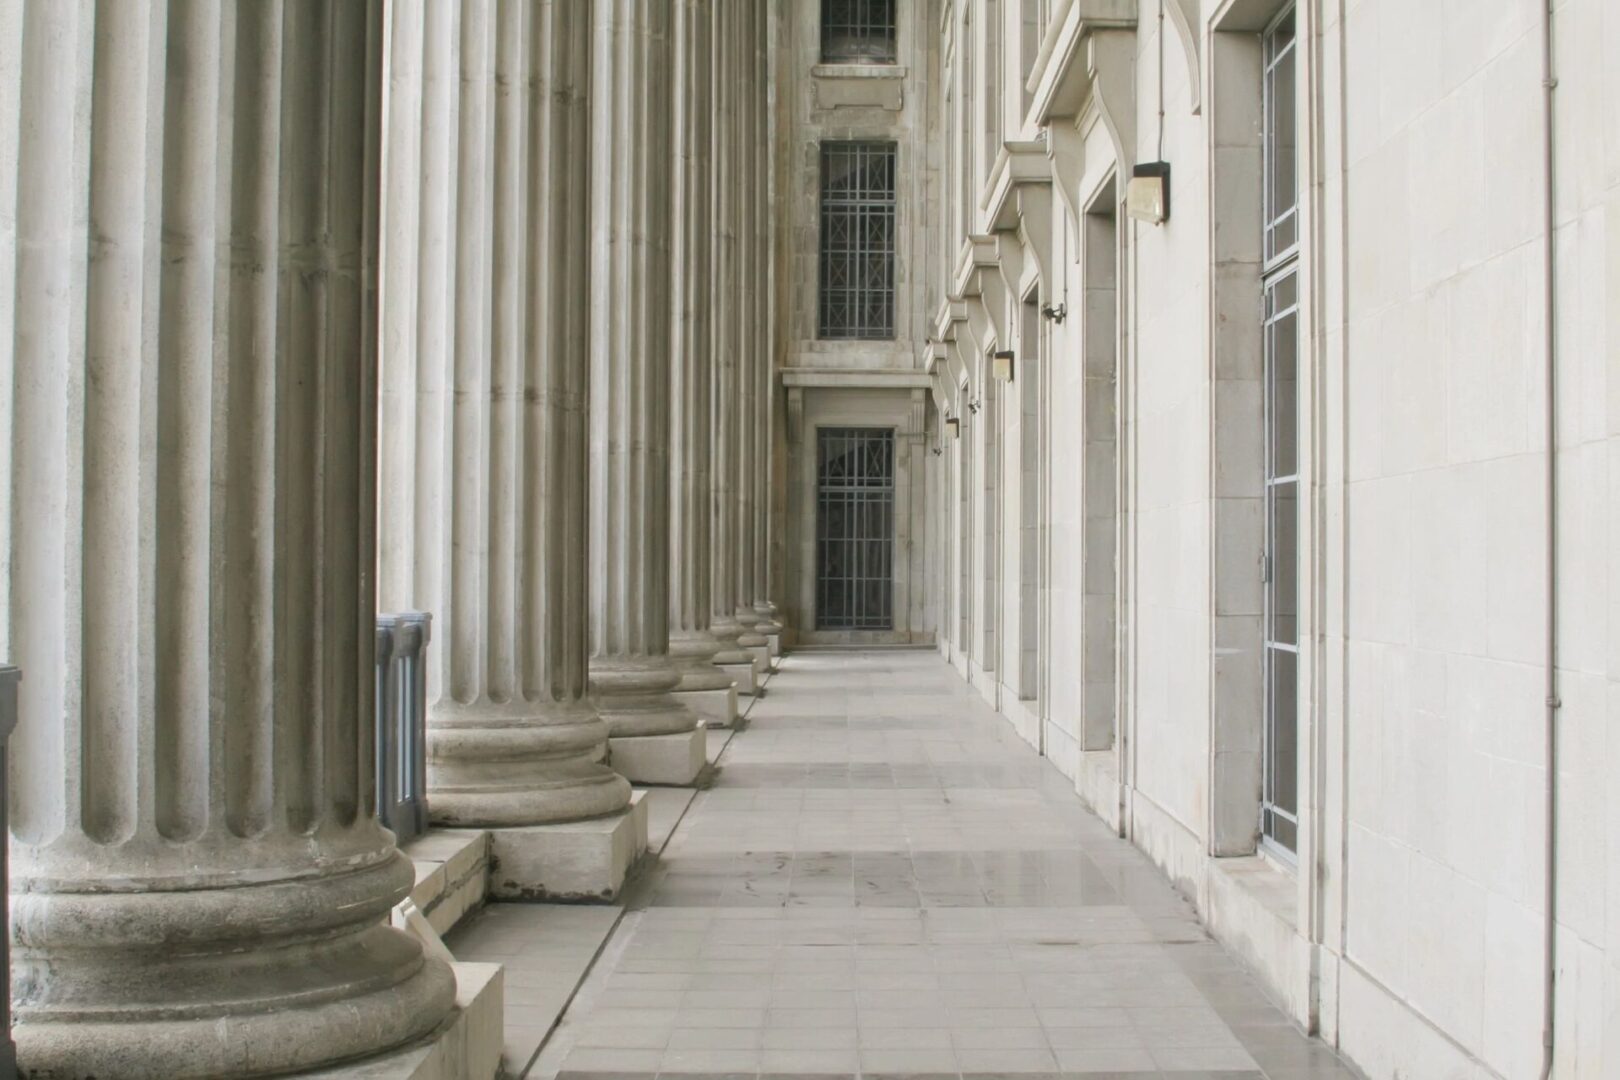 A Building Hallway With Ornate Pillars